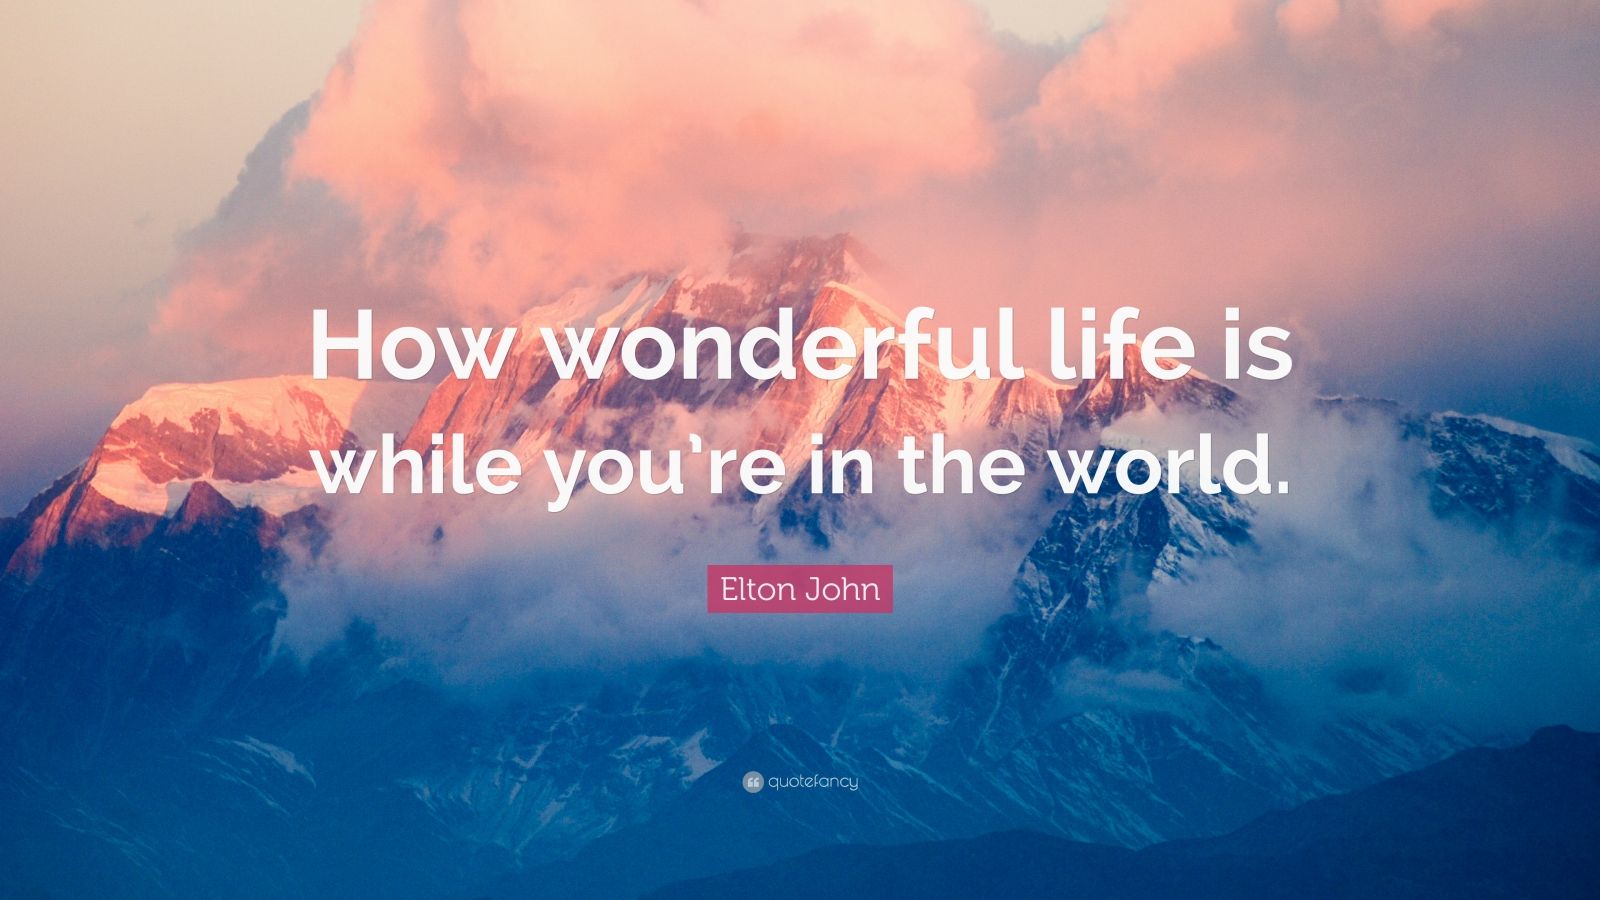 Elton John Quote: "How wonderful life is while you're in ...